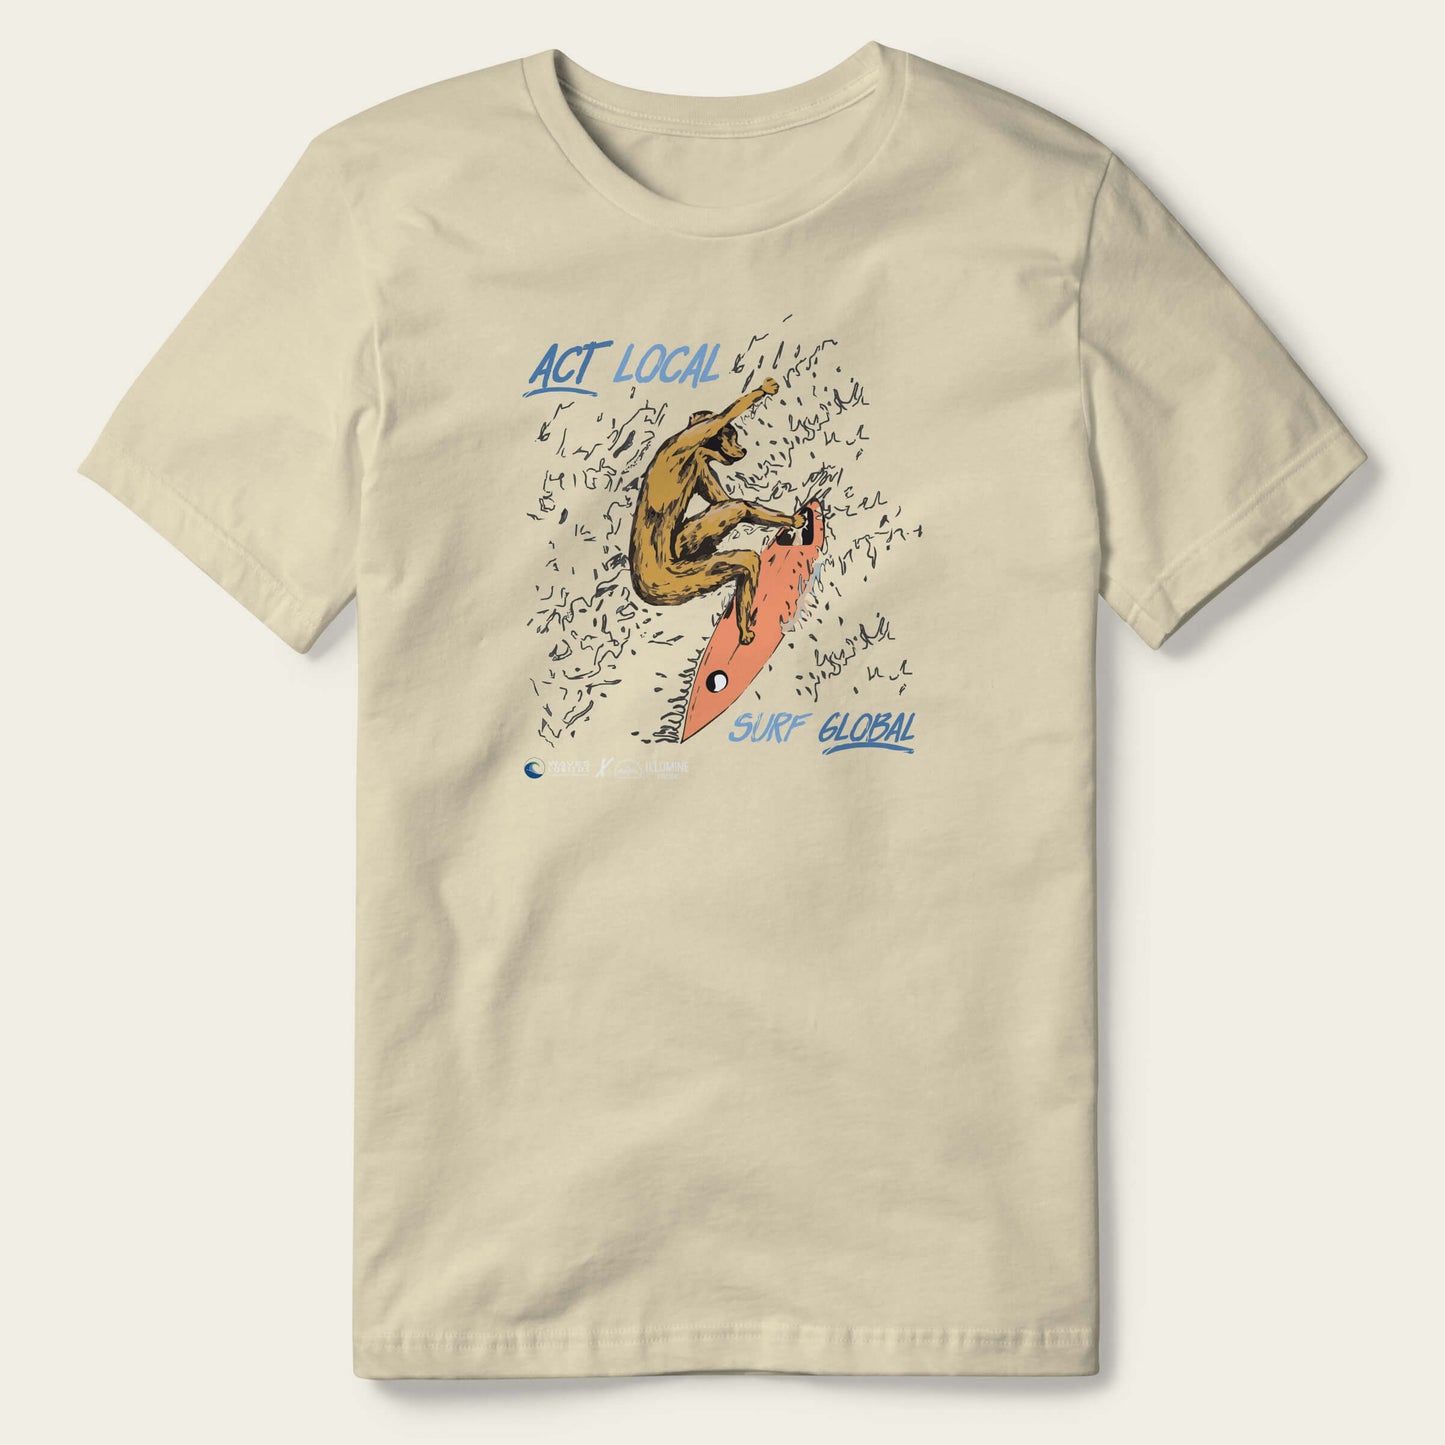 Act Local, Surf Global Tee - Natural